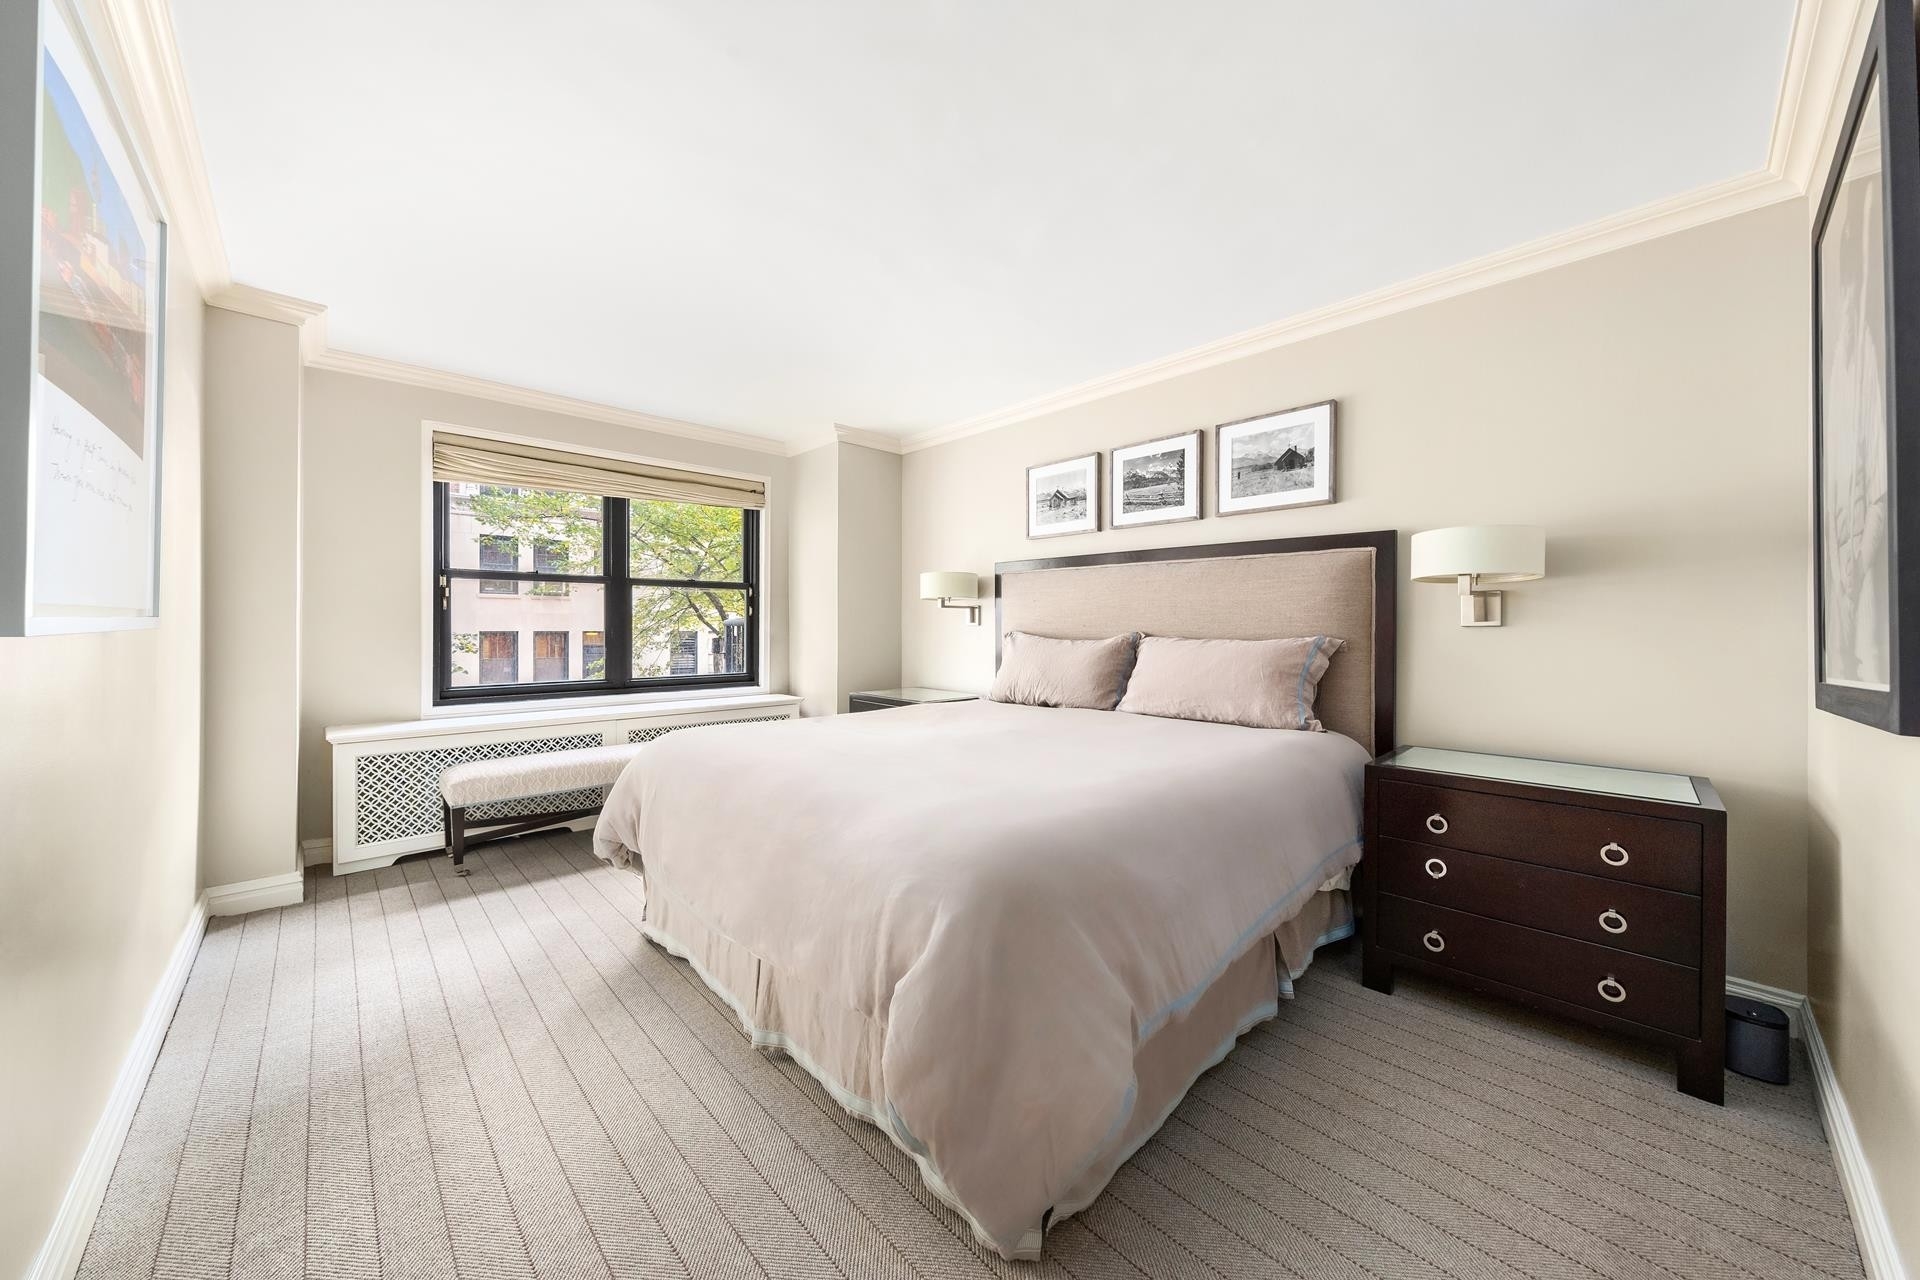 5. Co-op Properties for Sale at 1199 PARK AVE, 2H Carnegie Hill, New York, NY 10128